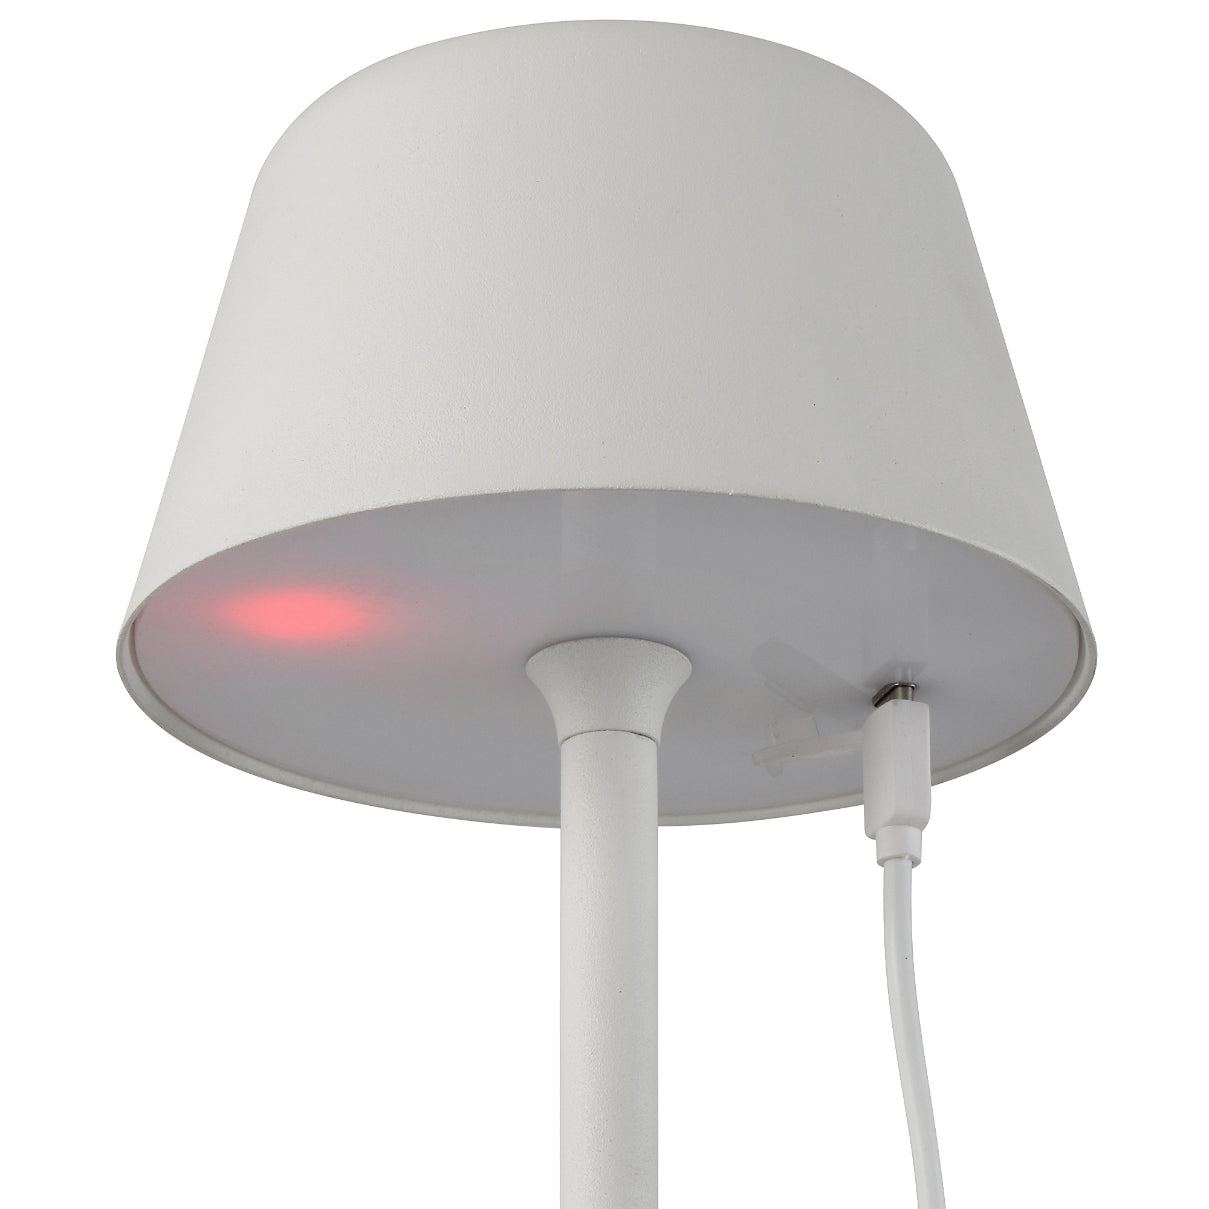 BRIANA Rechargeable Table Lamp White 3CCT - BRIANA TL-WH